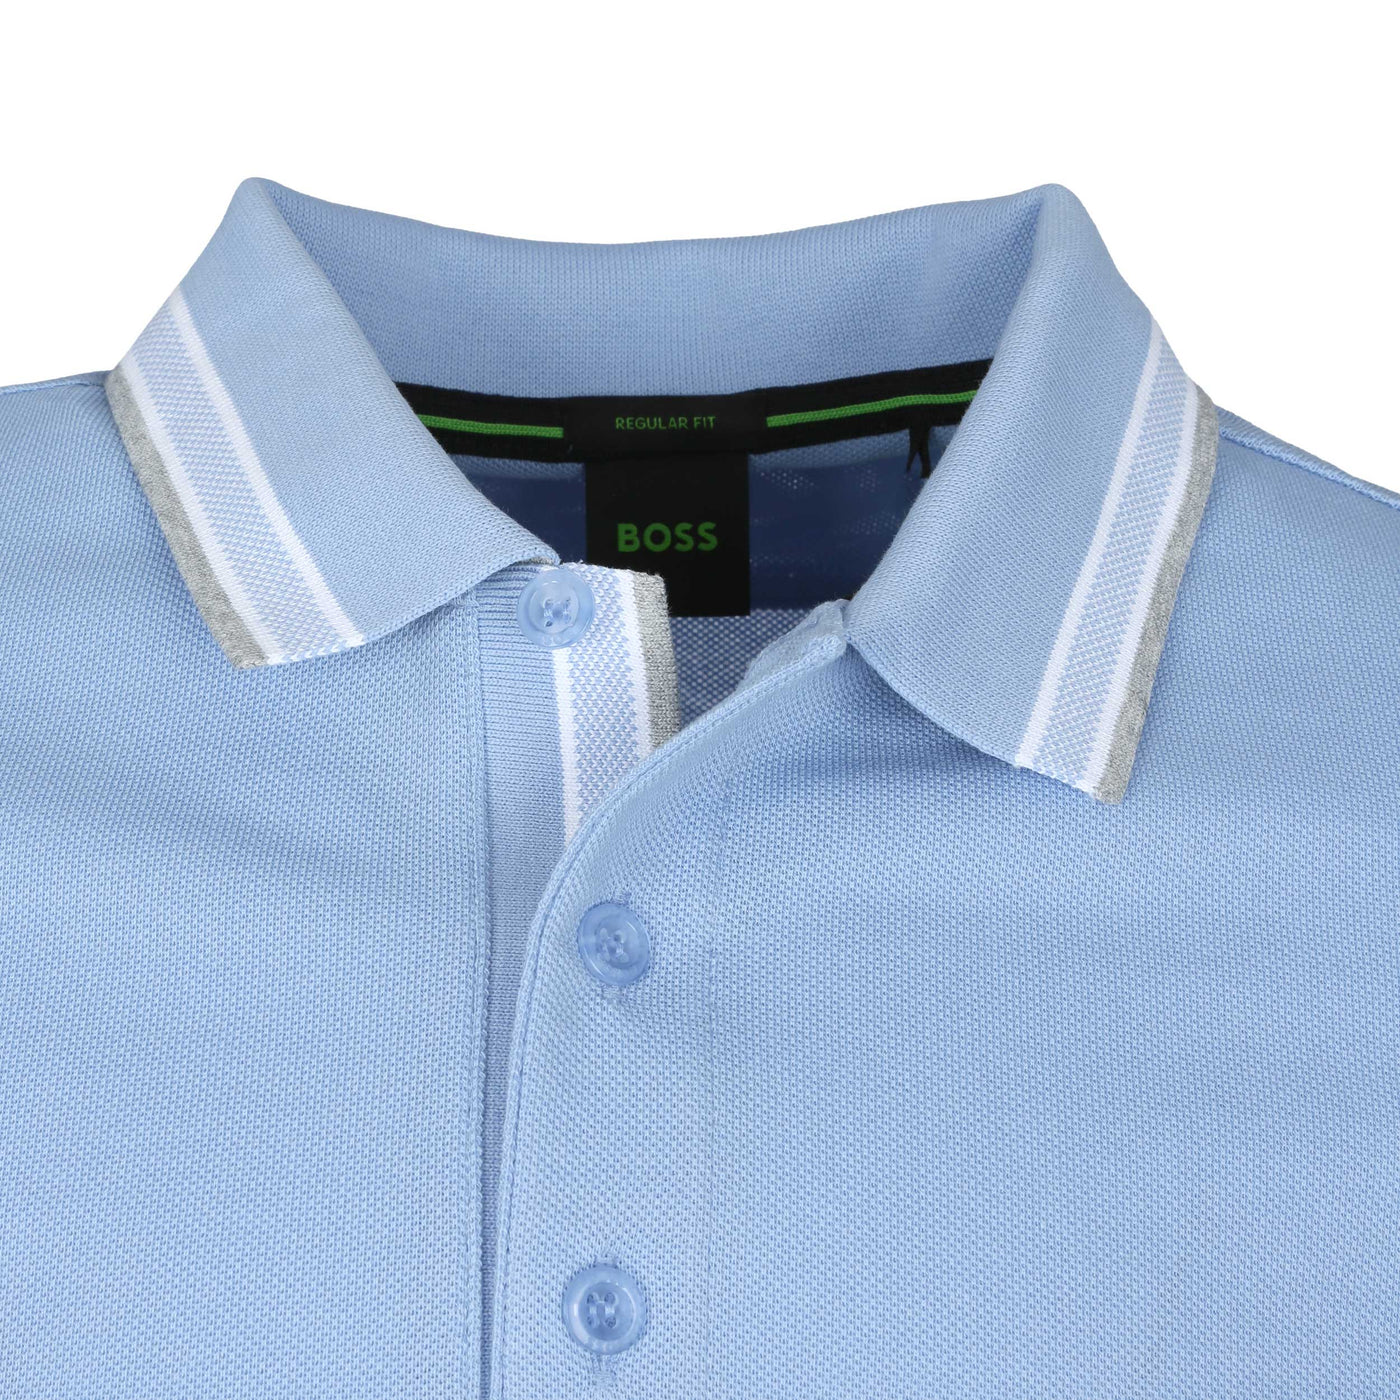 BOSS Paddy Polo Shirt in Sky Blue Placket